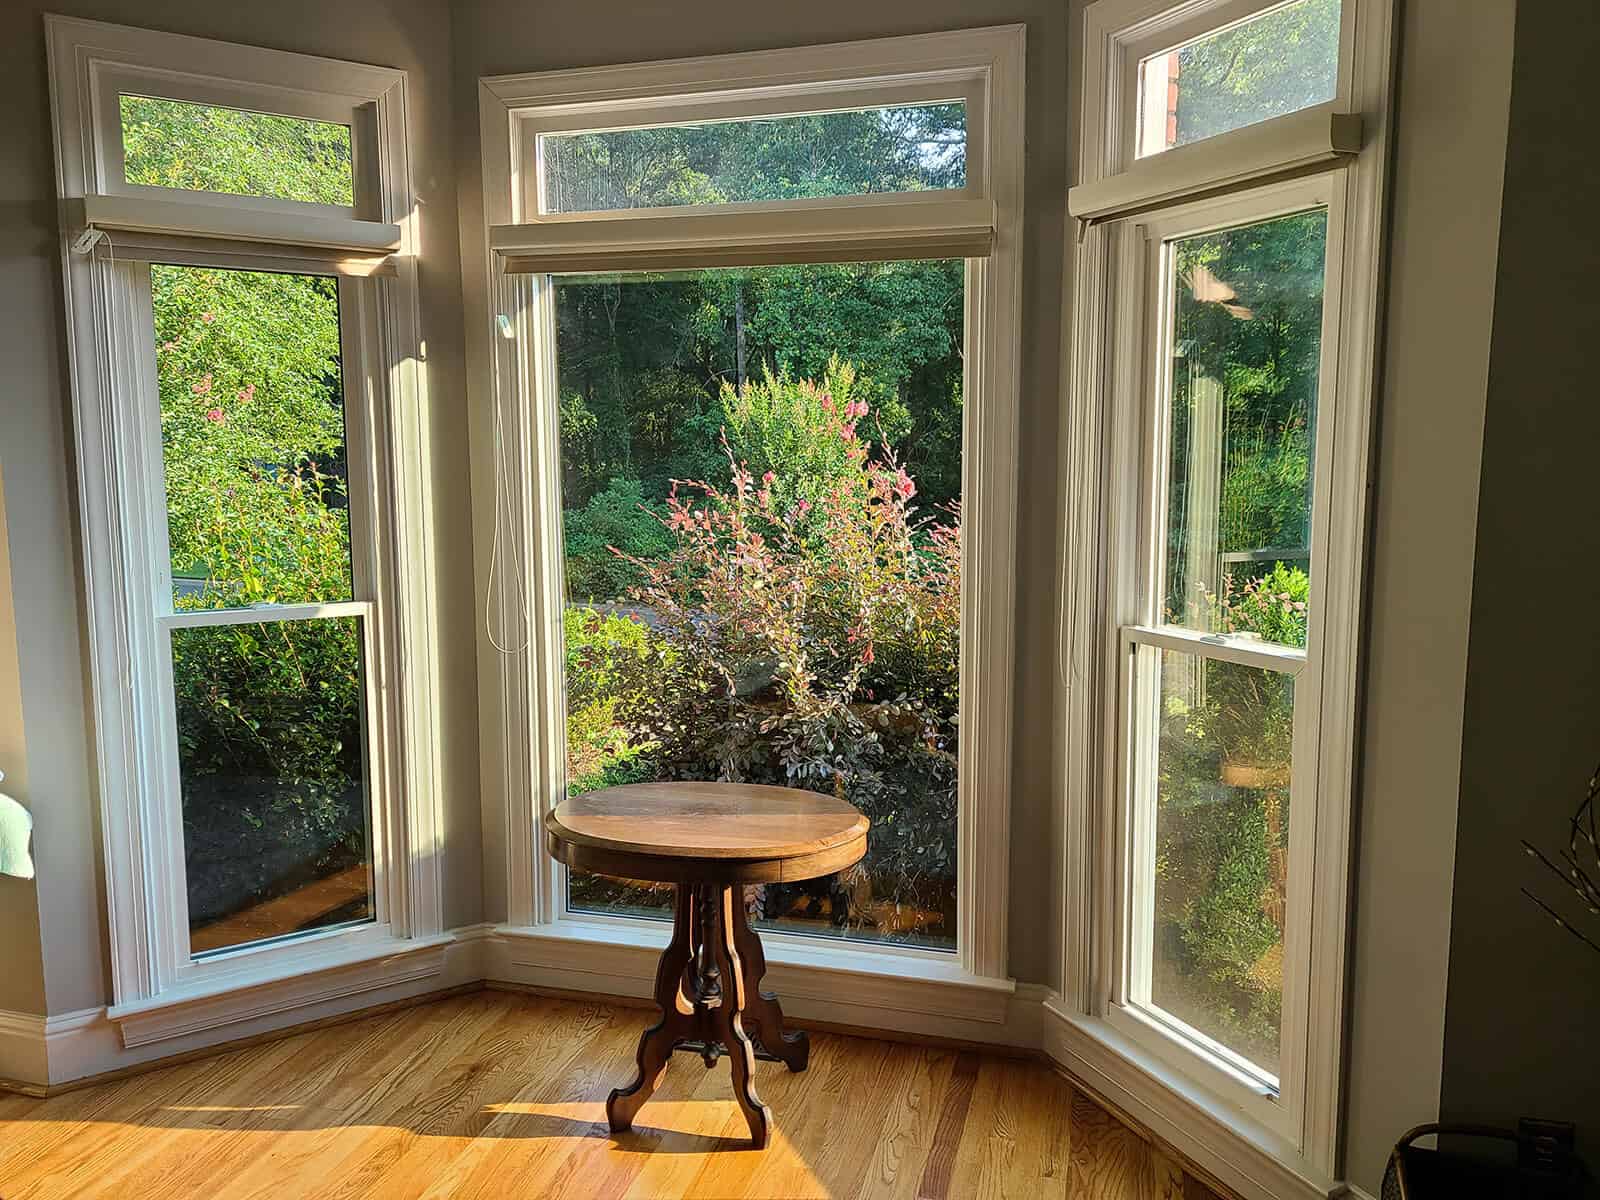 Interior view of two double hung windows installed on either side of a picture window